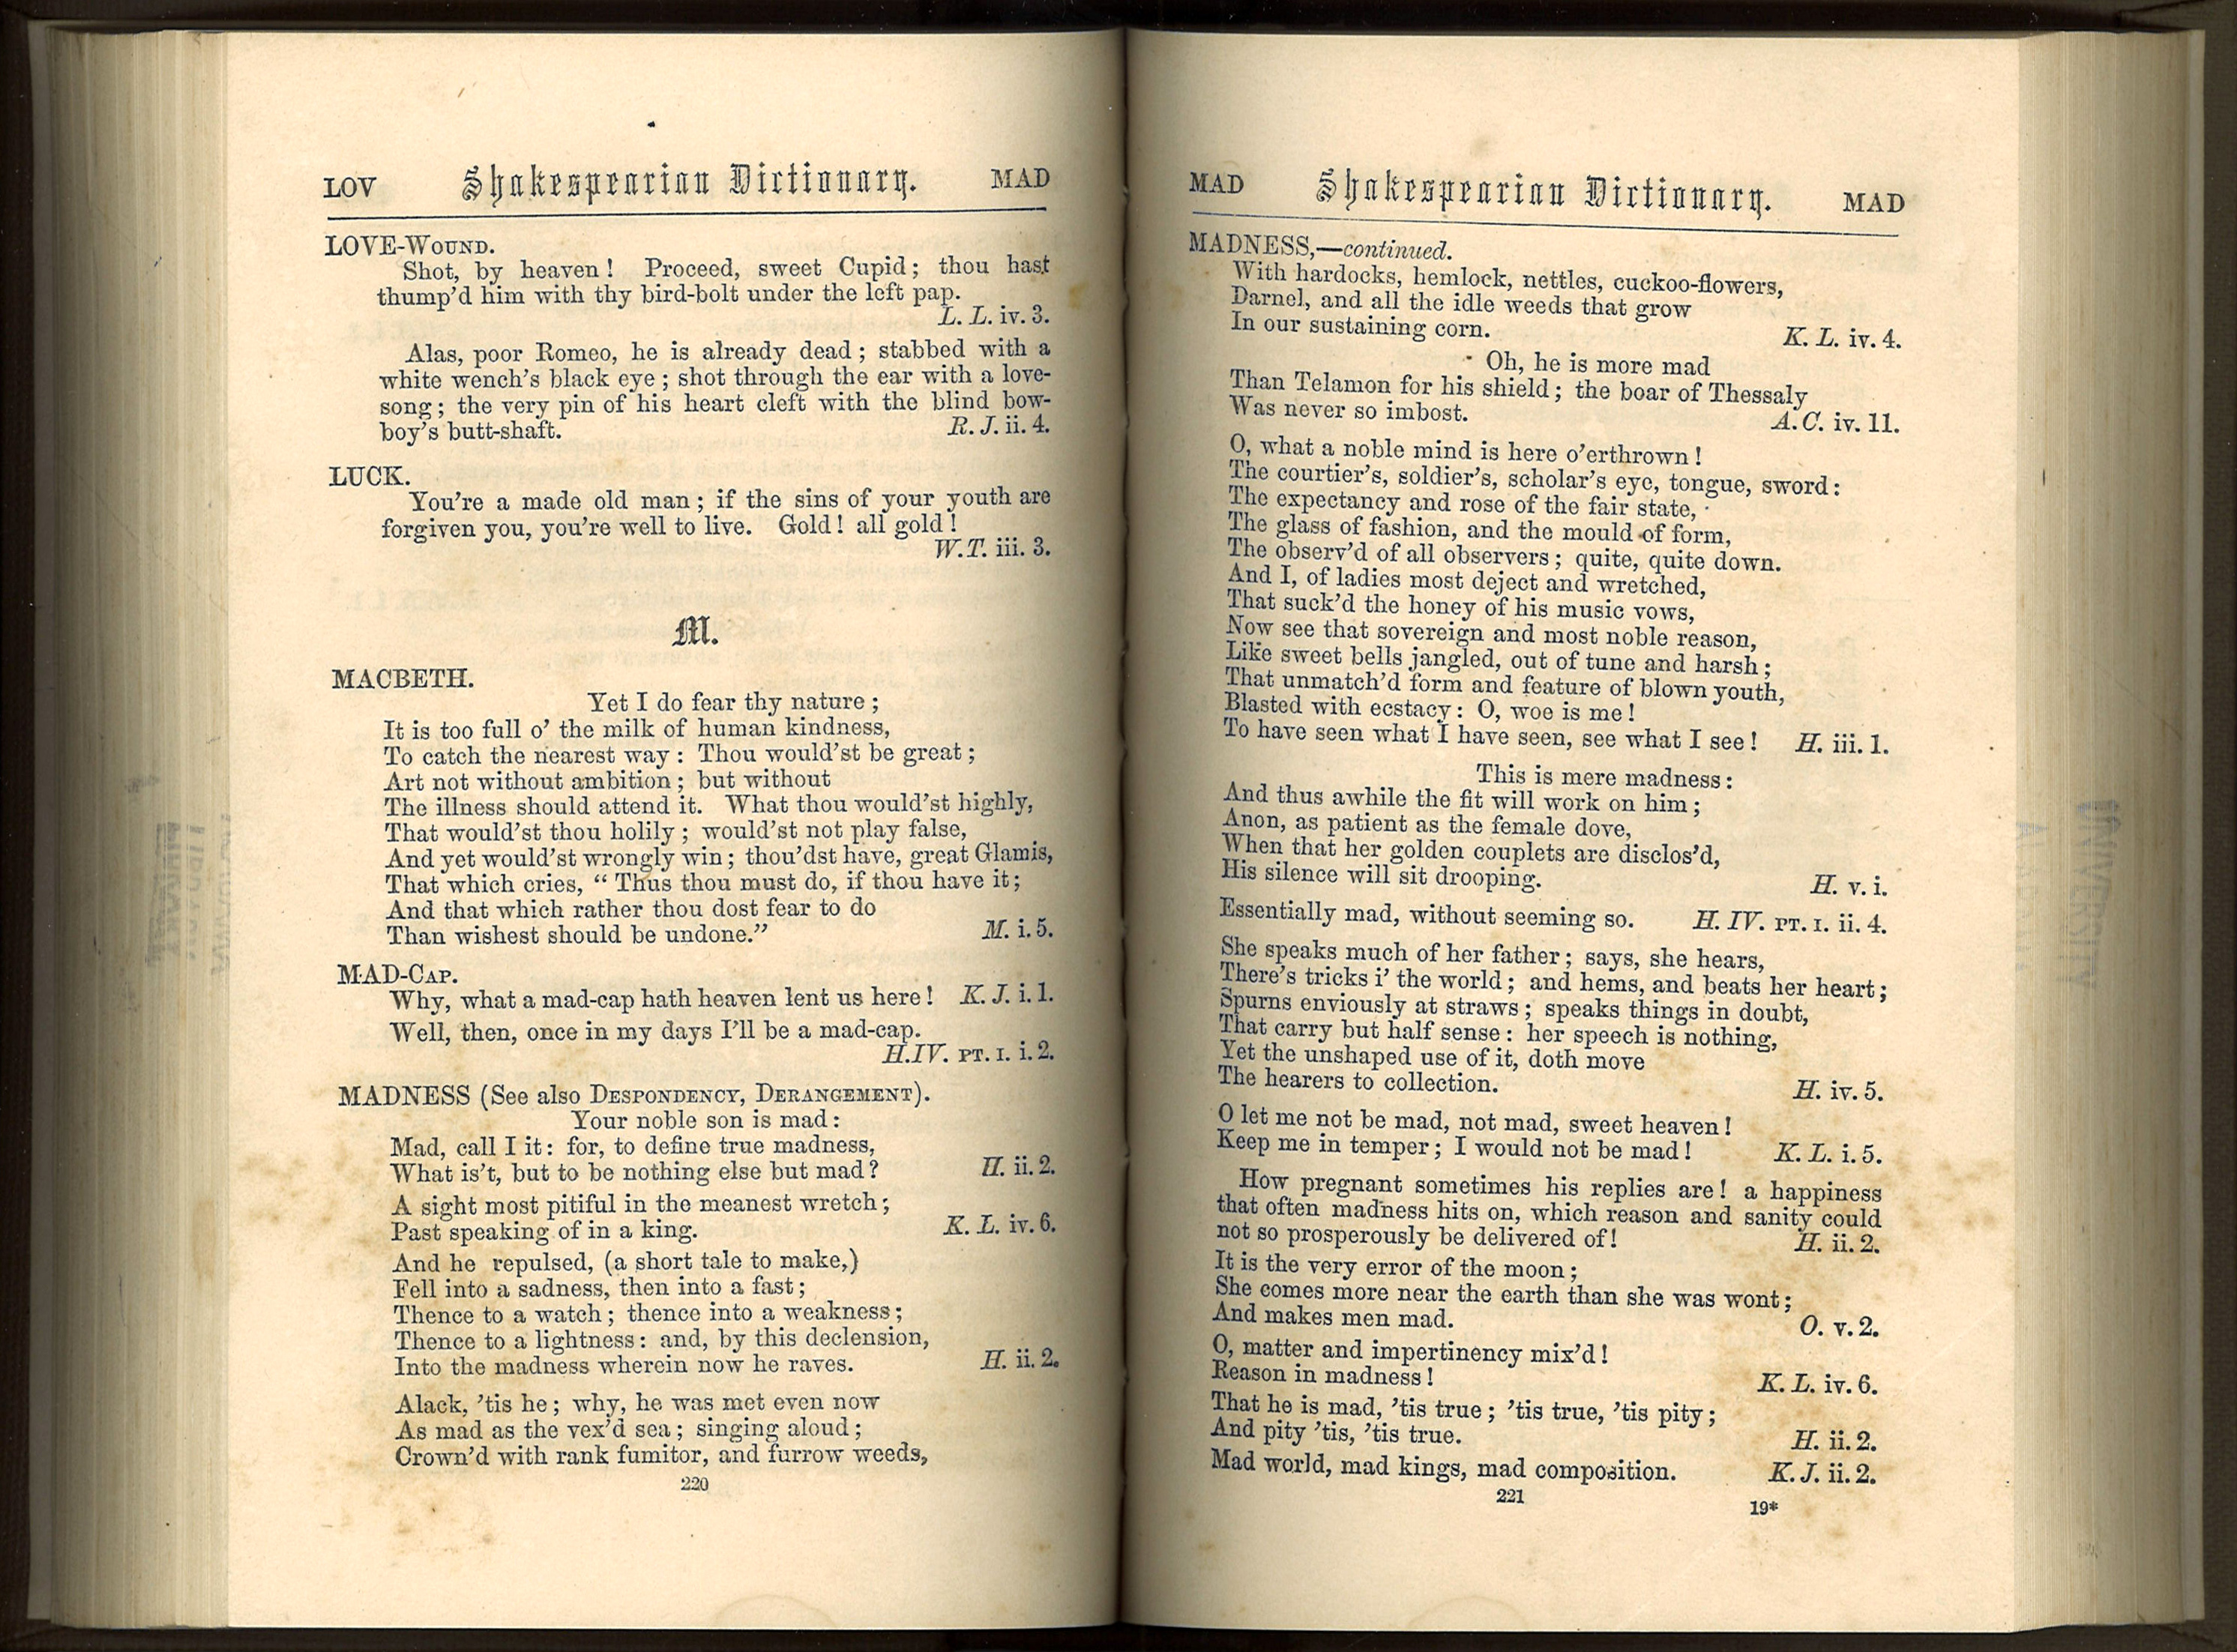 Page opening from book of Shakespeare quotations, 1851